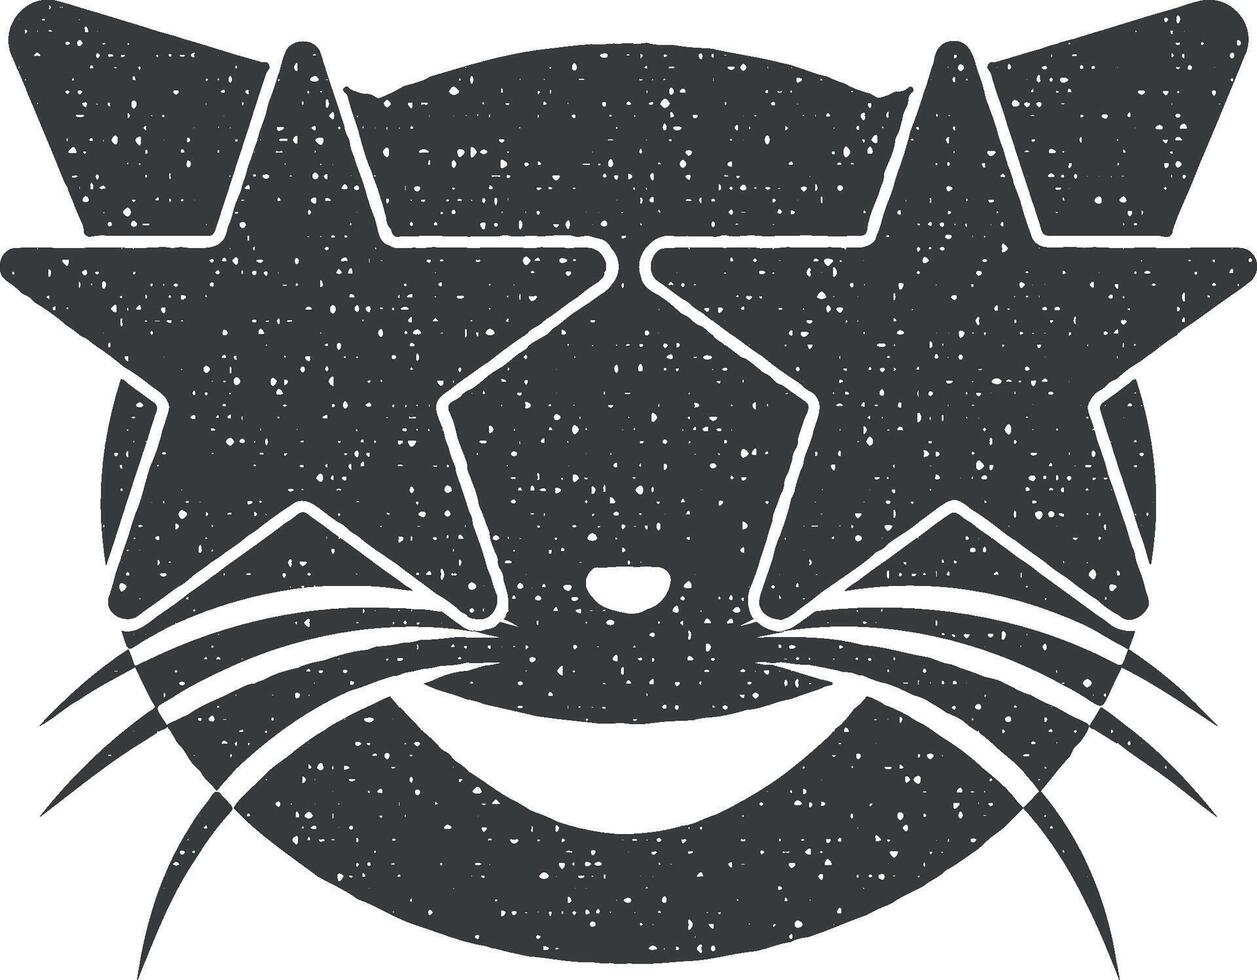 star cat vector icon illustration with stamp effect